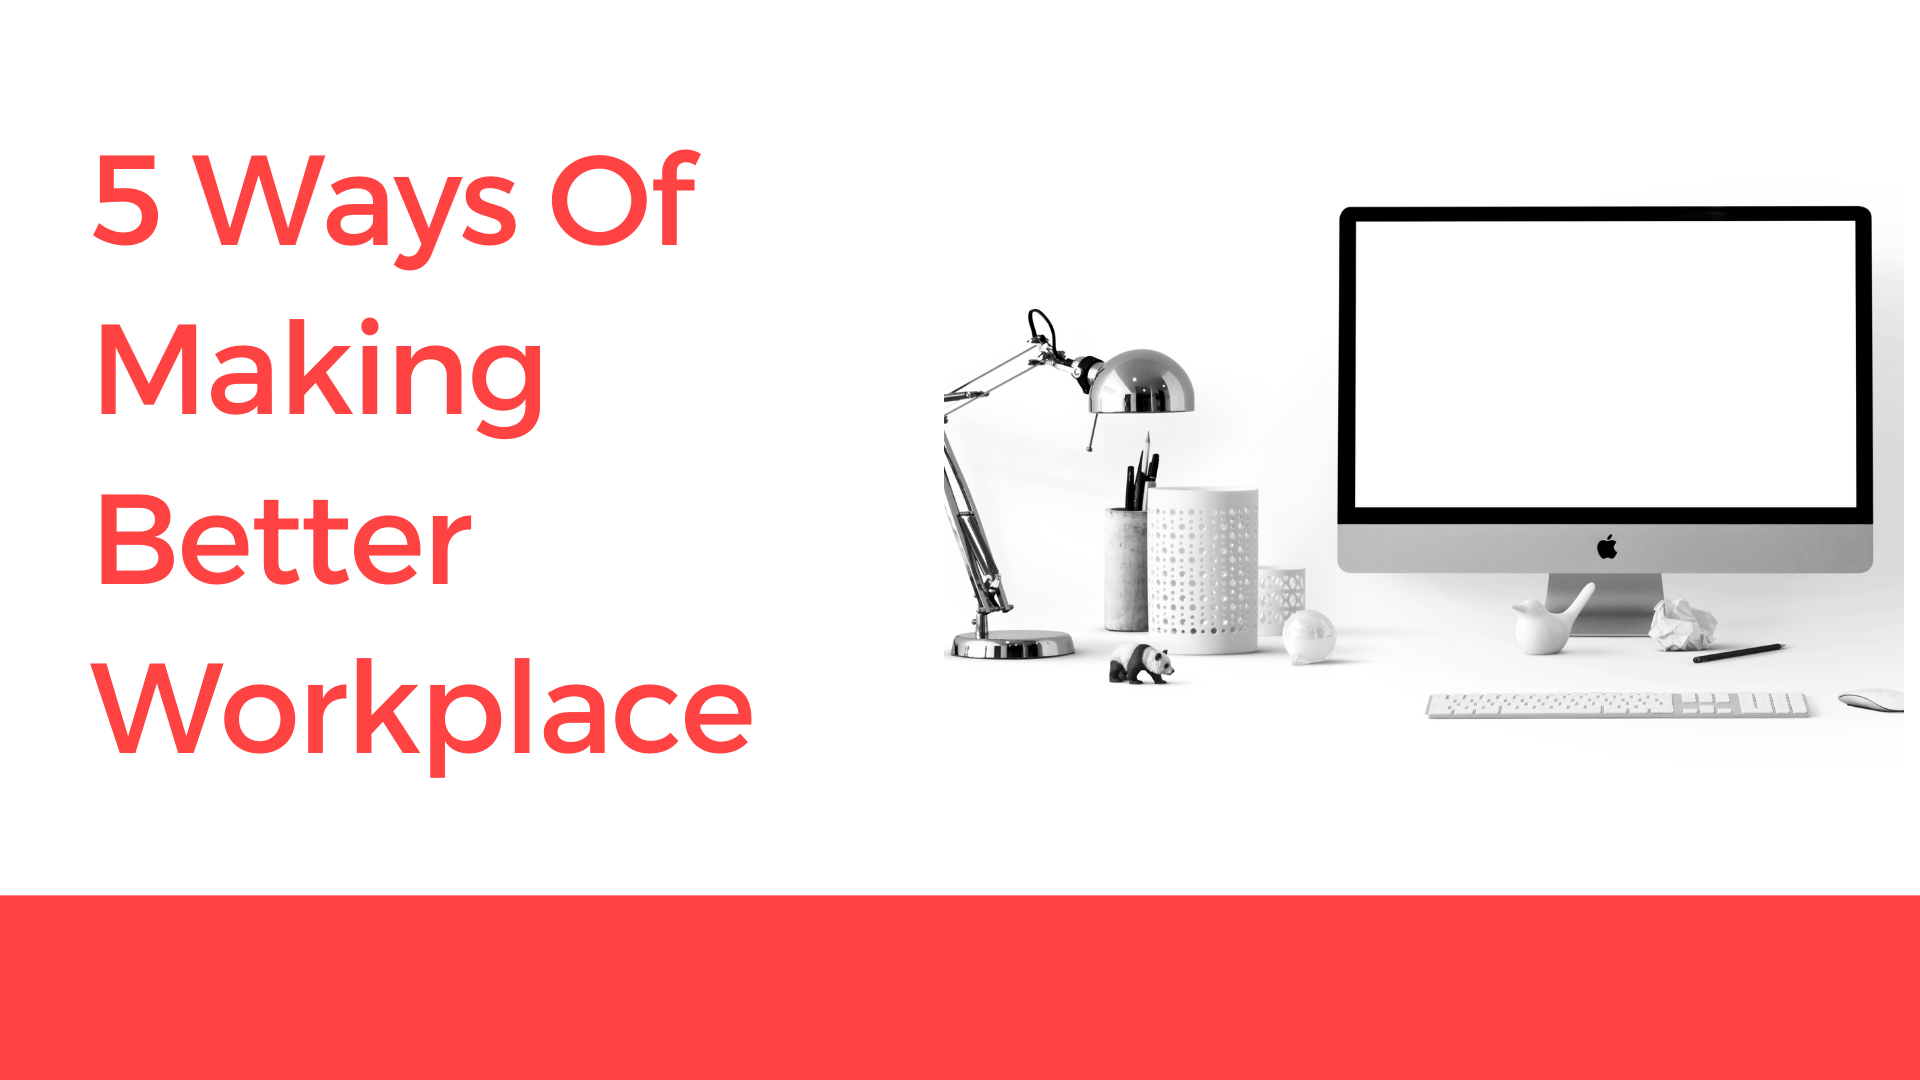 5 Ways Of Making Better Workplace